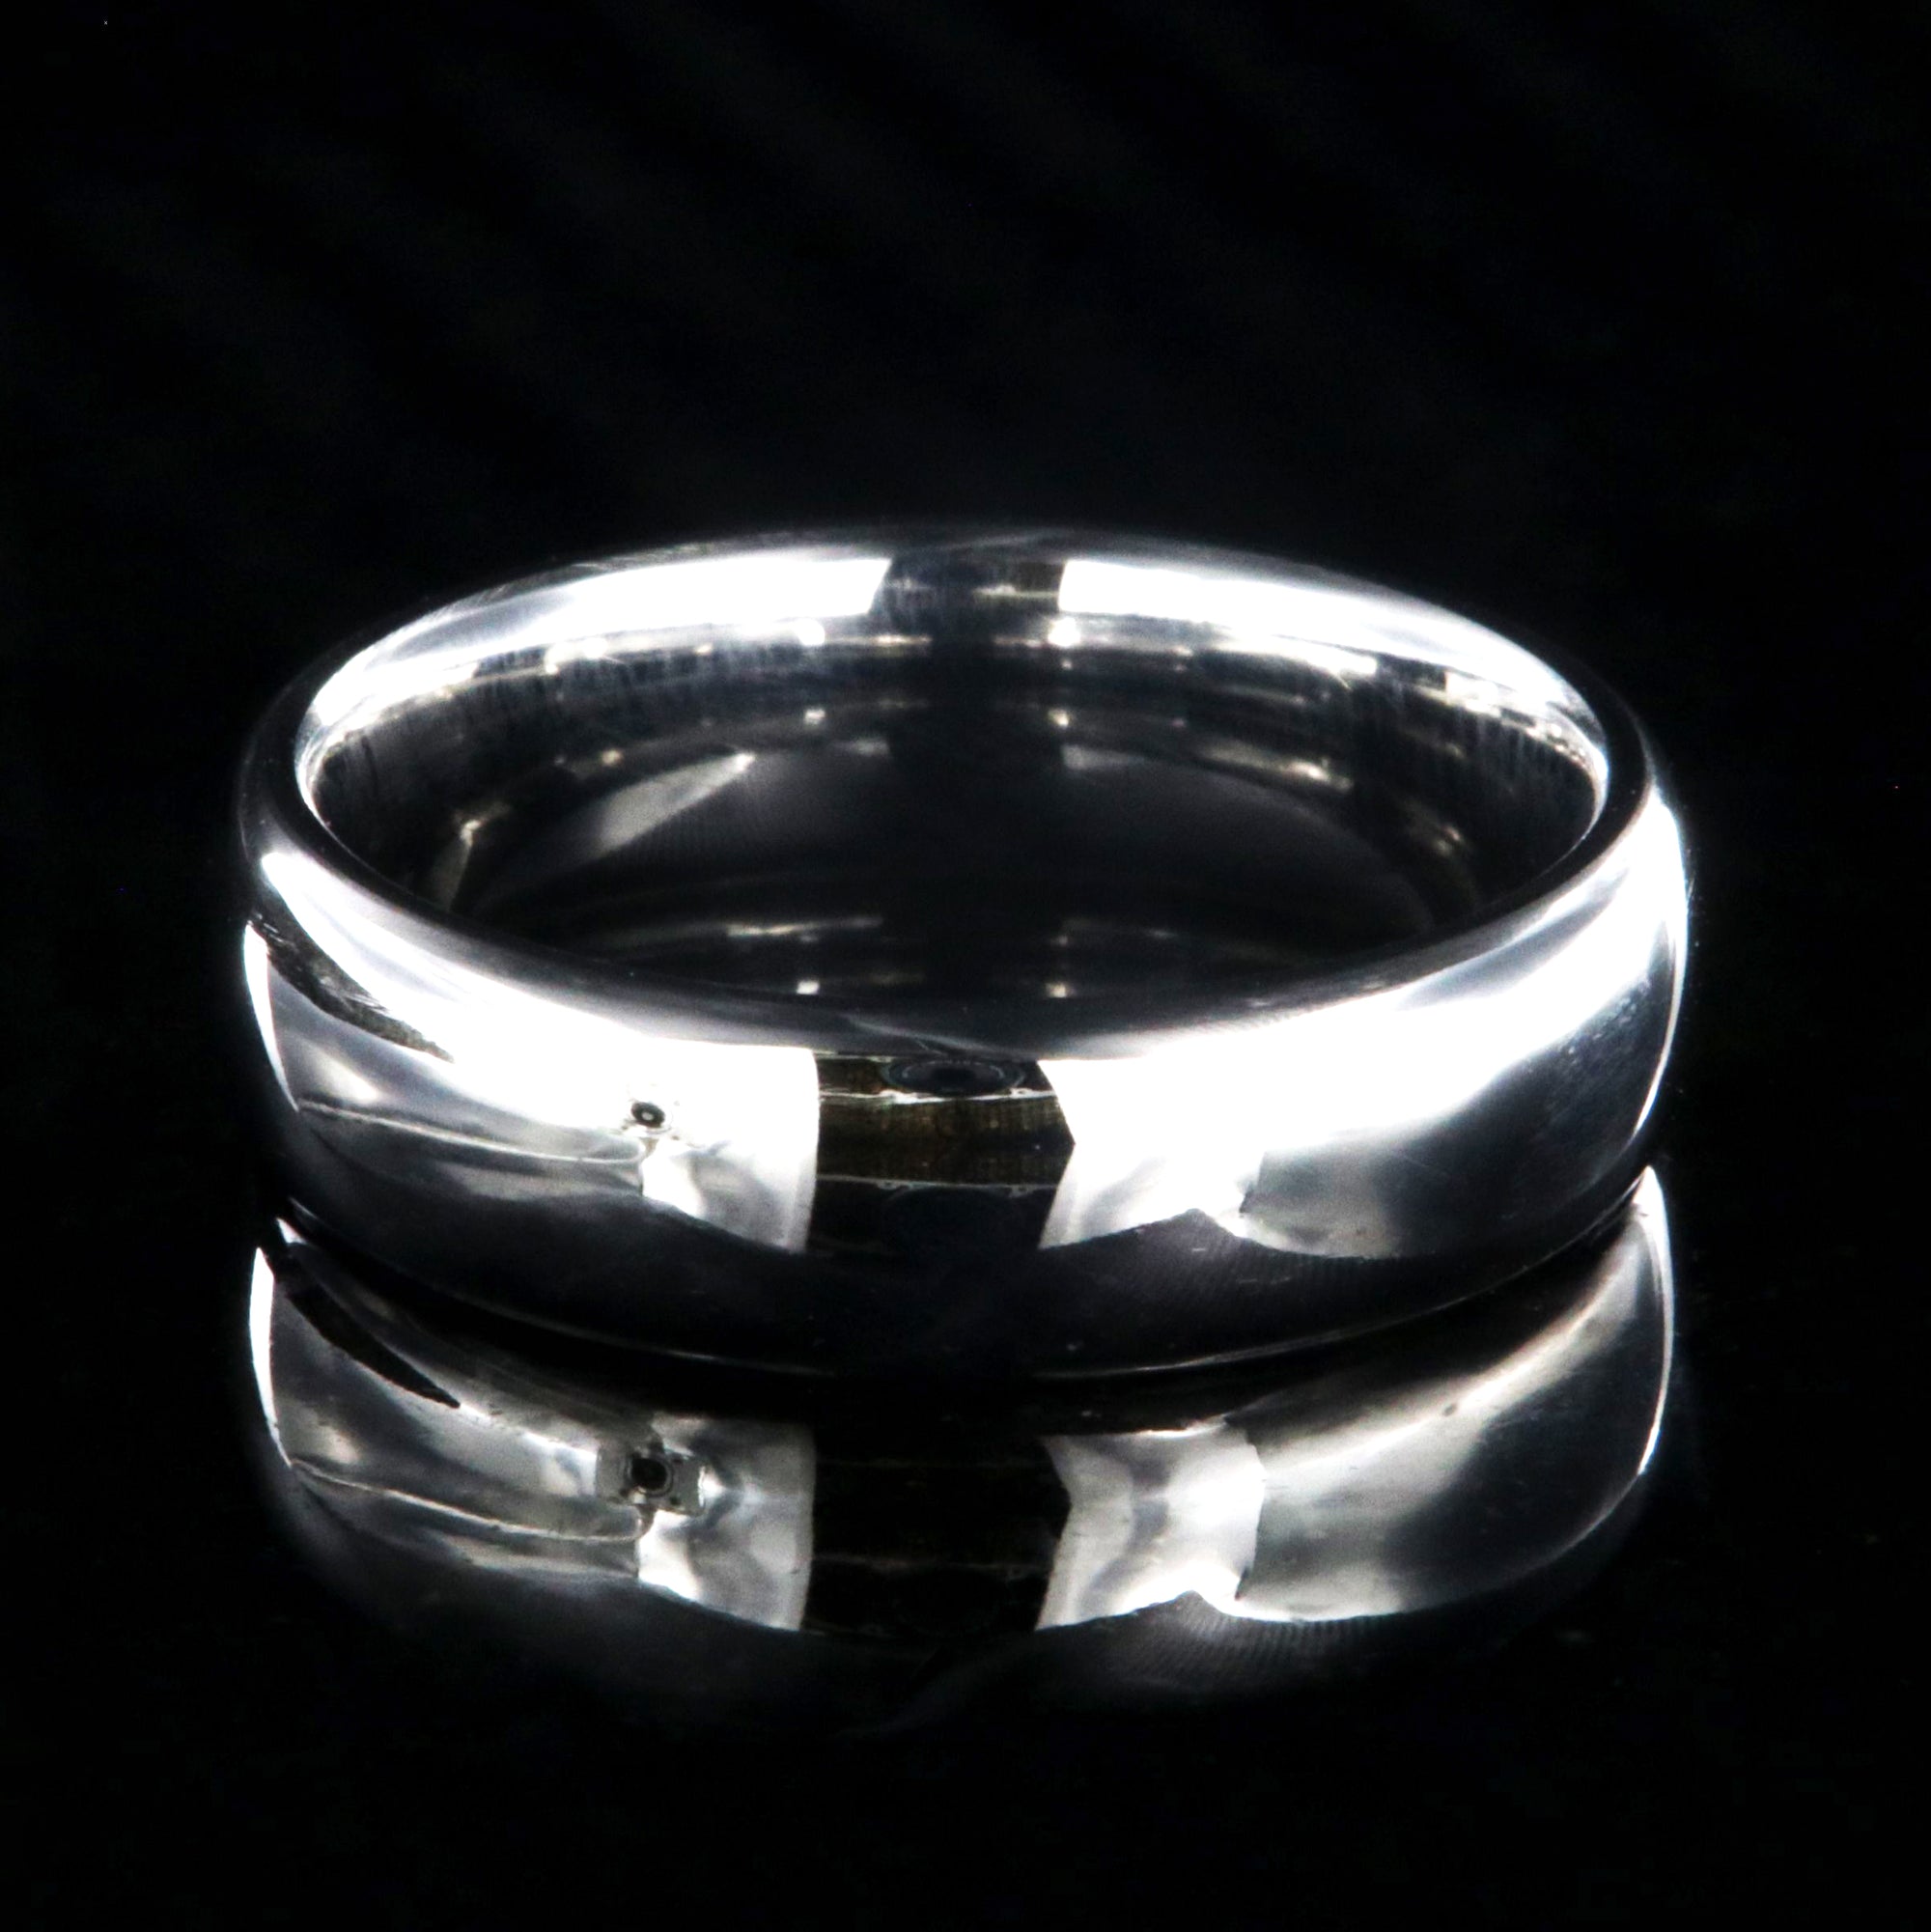 6mm wide cobalt wedding band with a polish finish and rounded profile